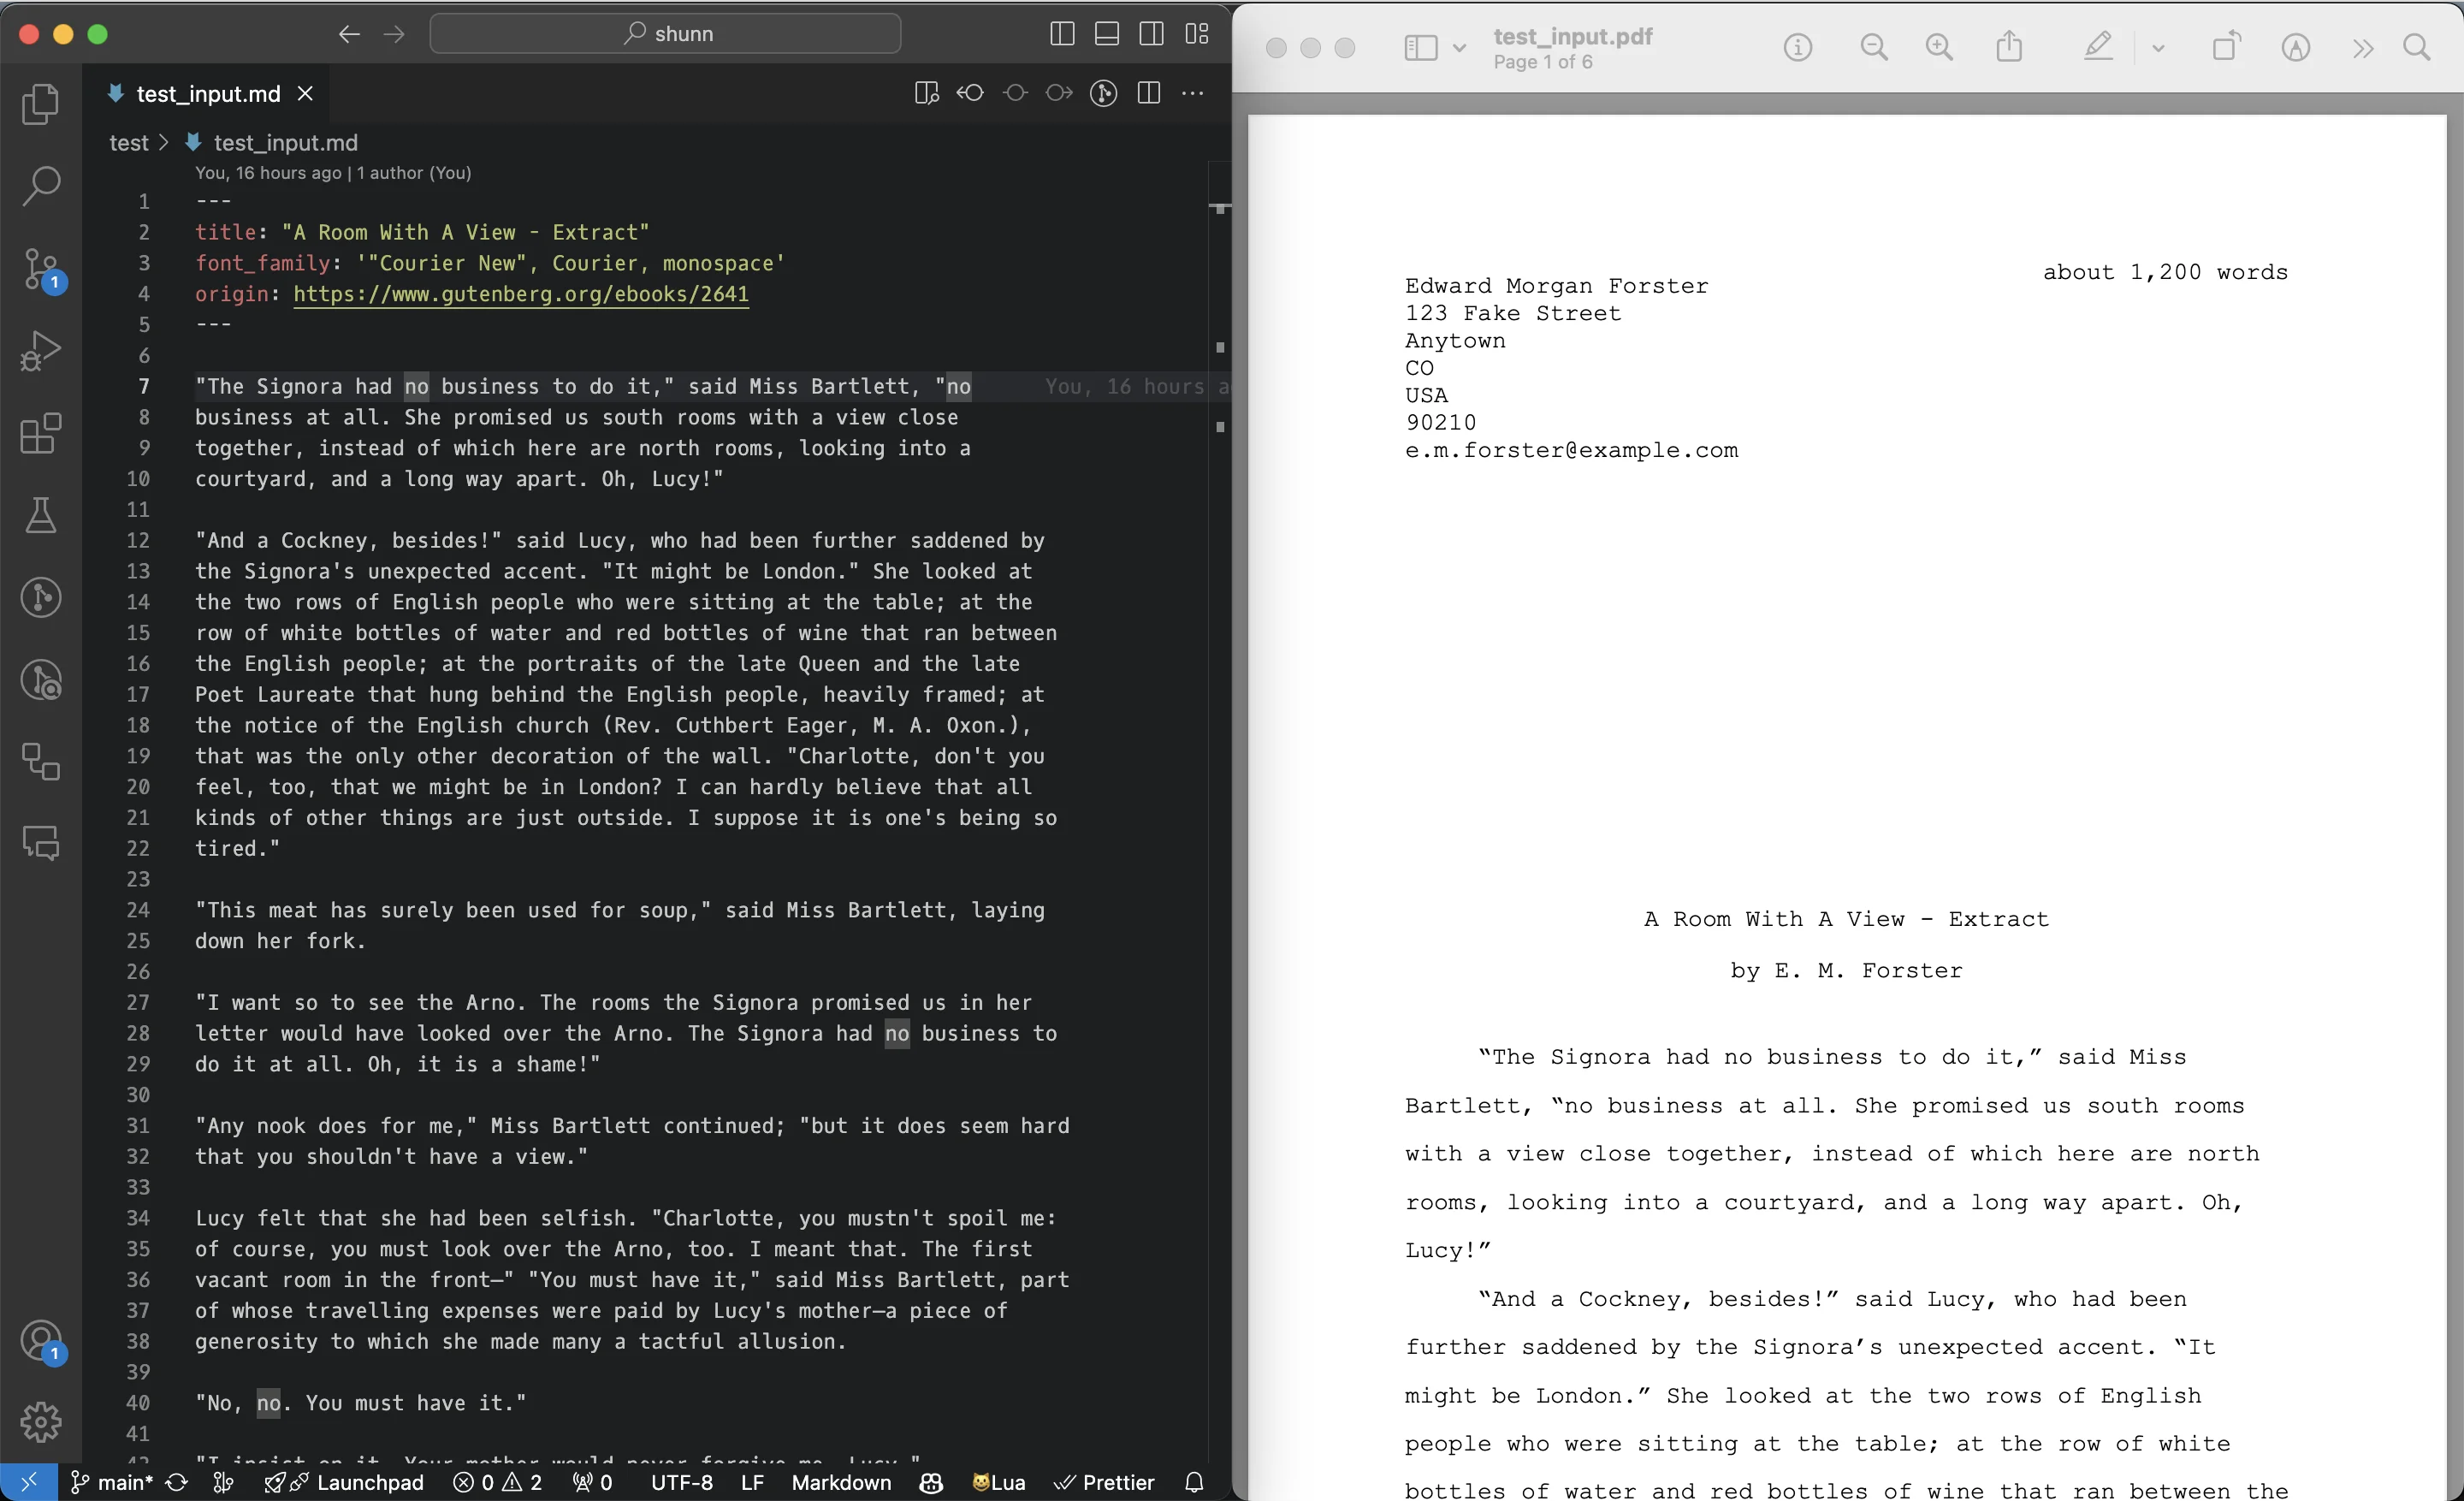 A screenshot showing Visual Studio Code on the left, with a Markdown extract of E. M. Forster's A Room With A View, and a PDF version of that extract on the right, generated by the Shunn tool.